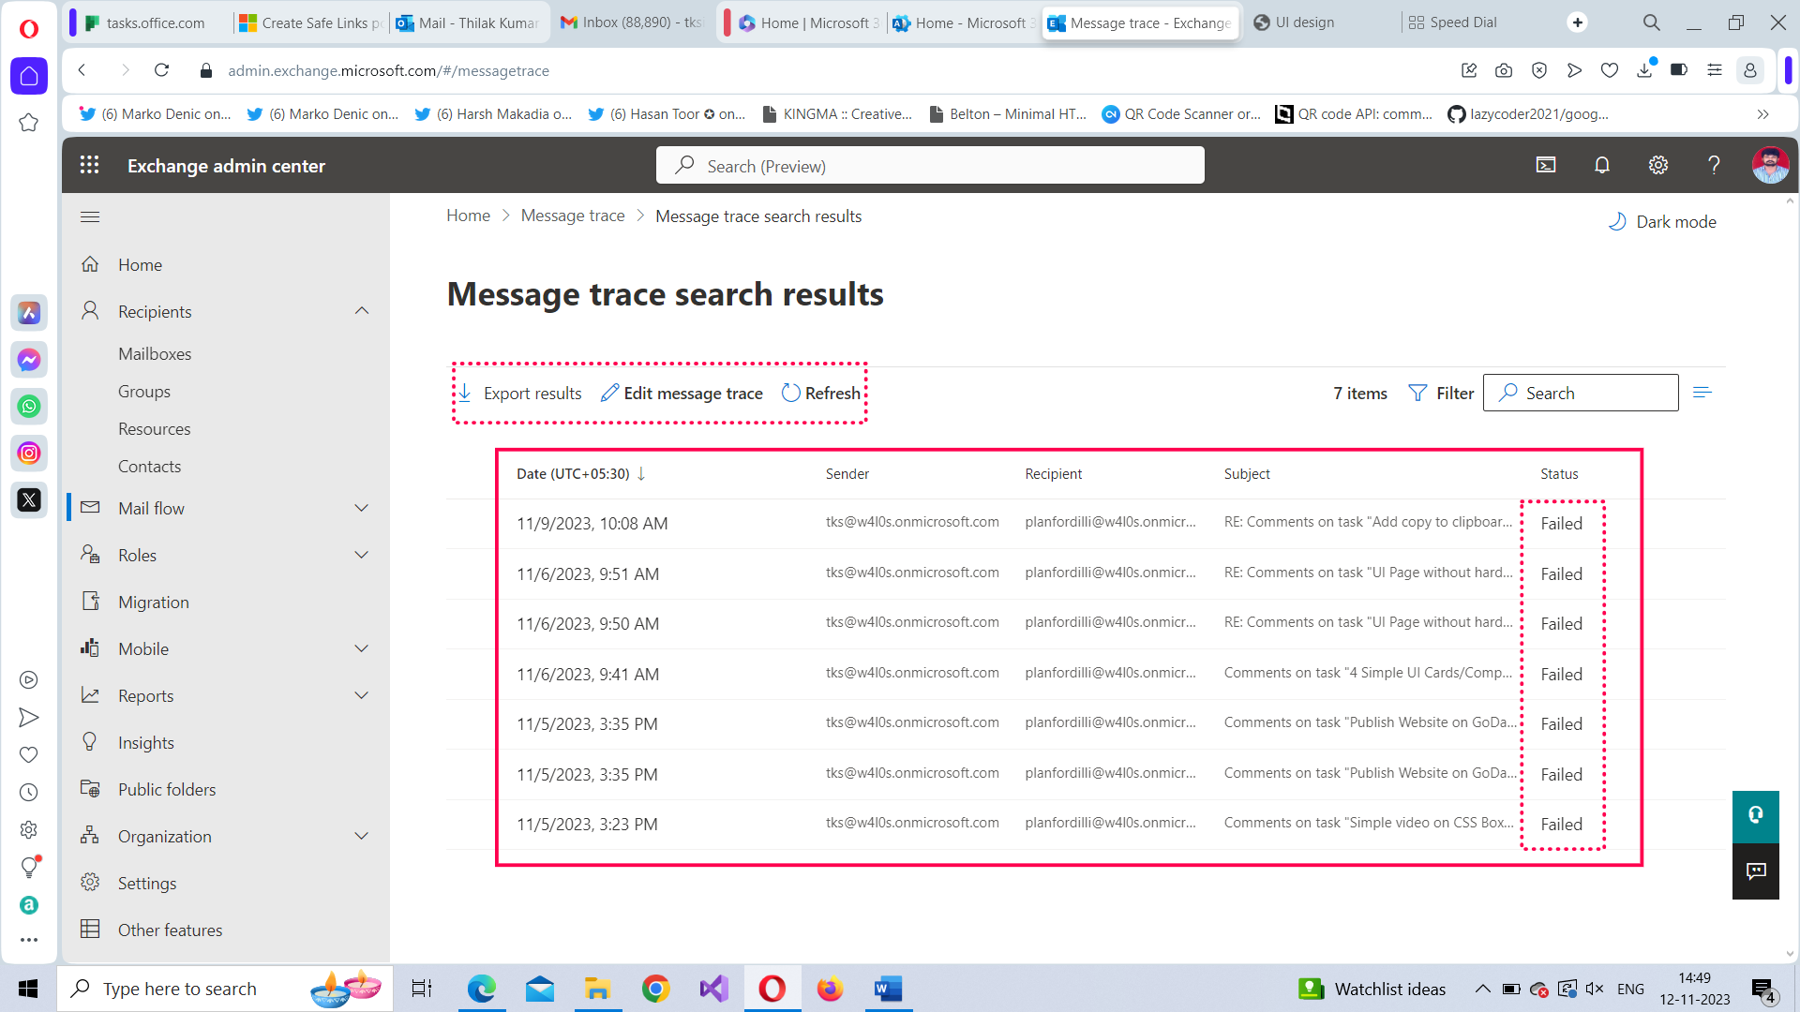 This screenshot shows message trace search results being displayed.